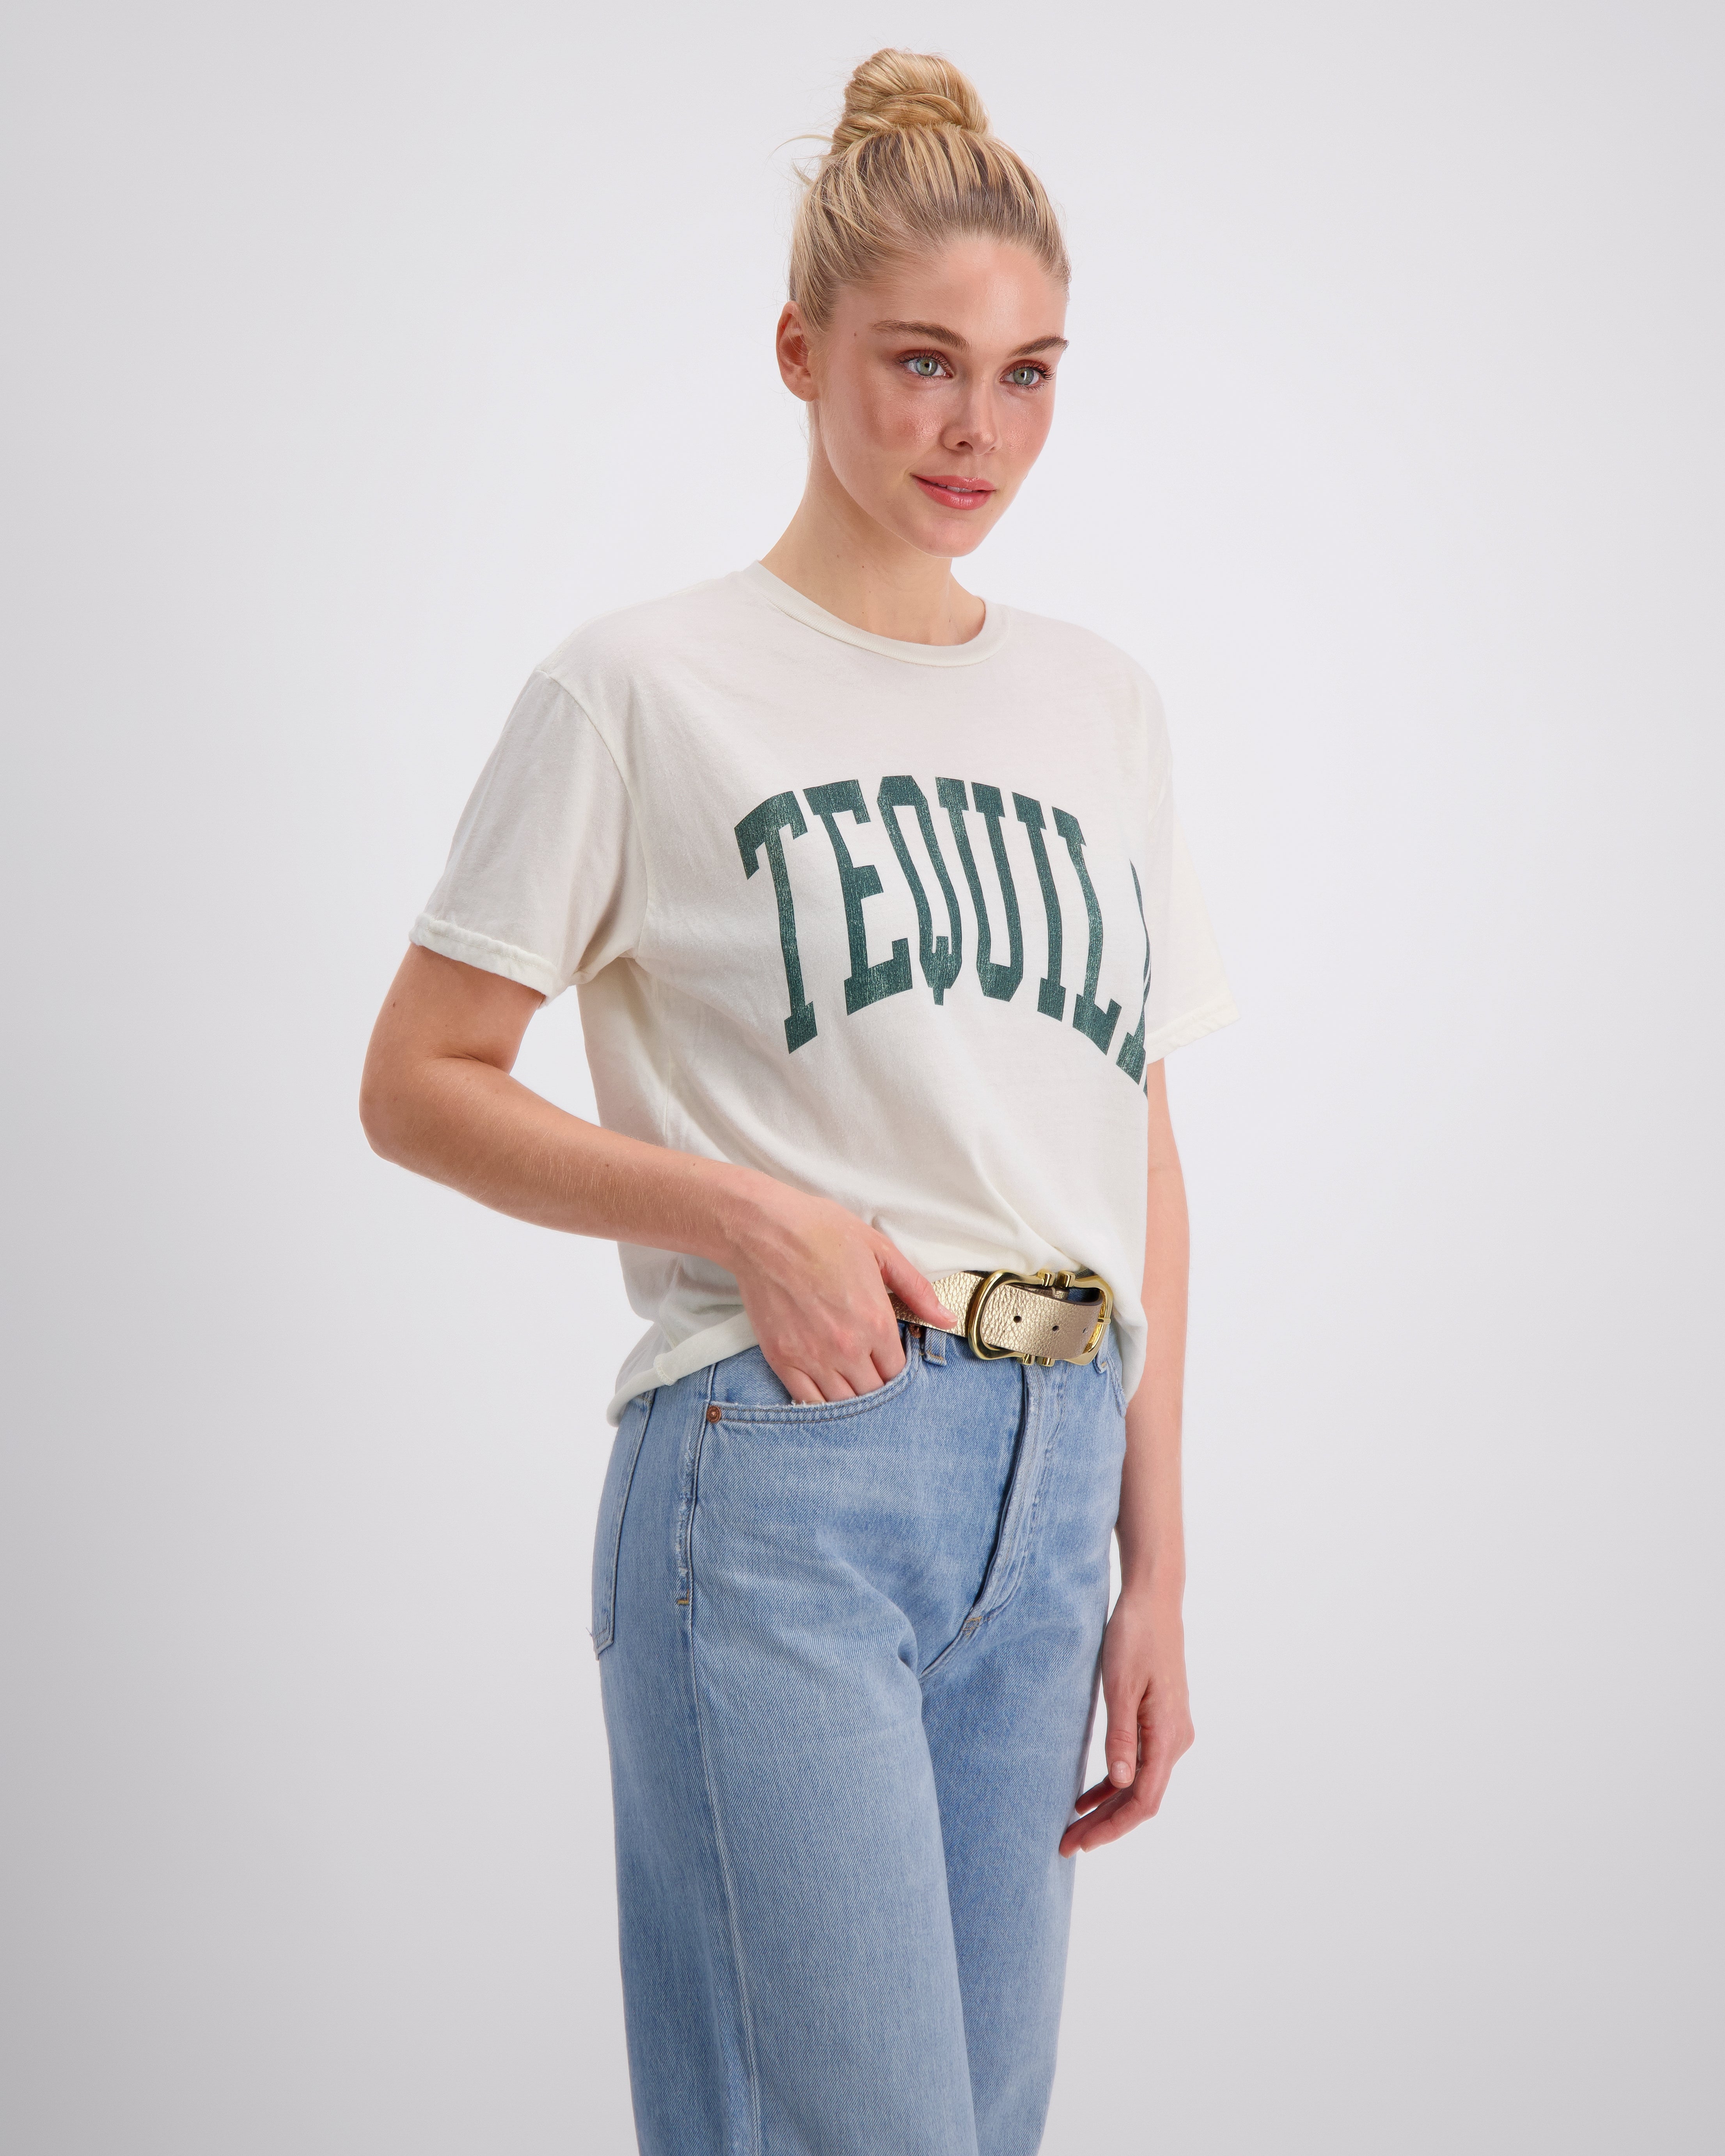 Tequilla Tee in Vintage White